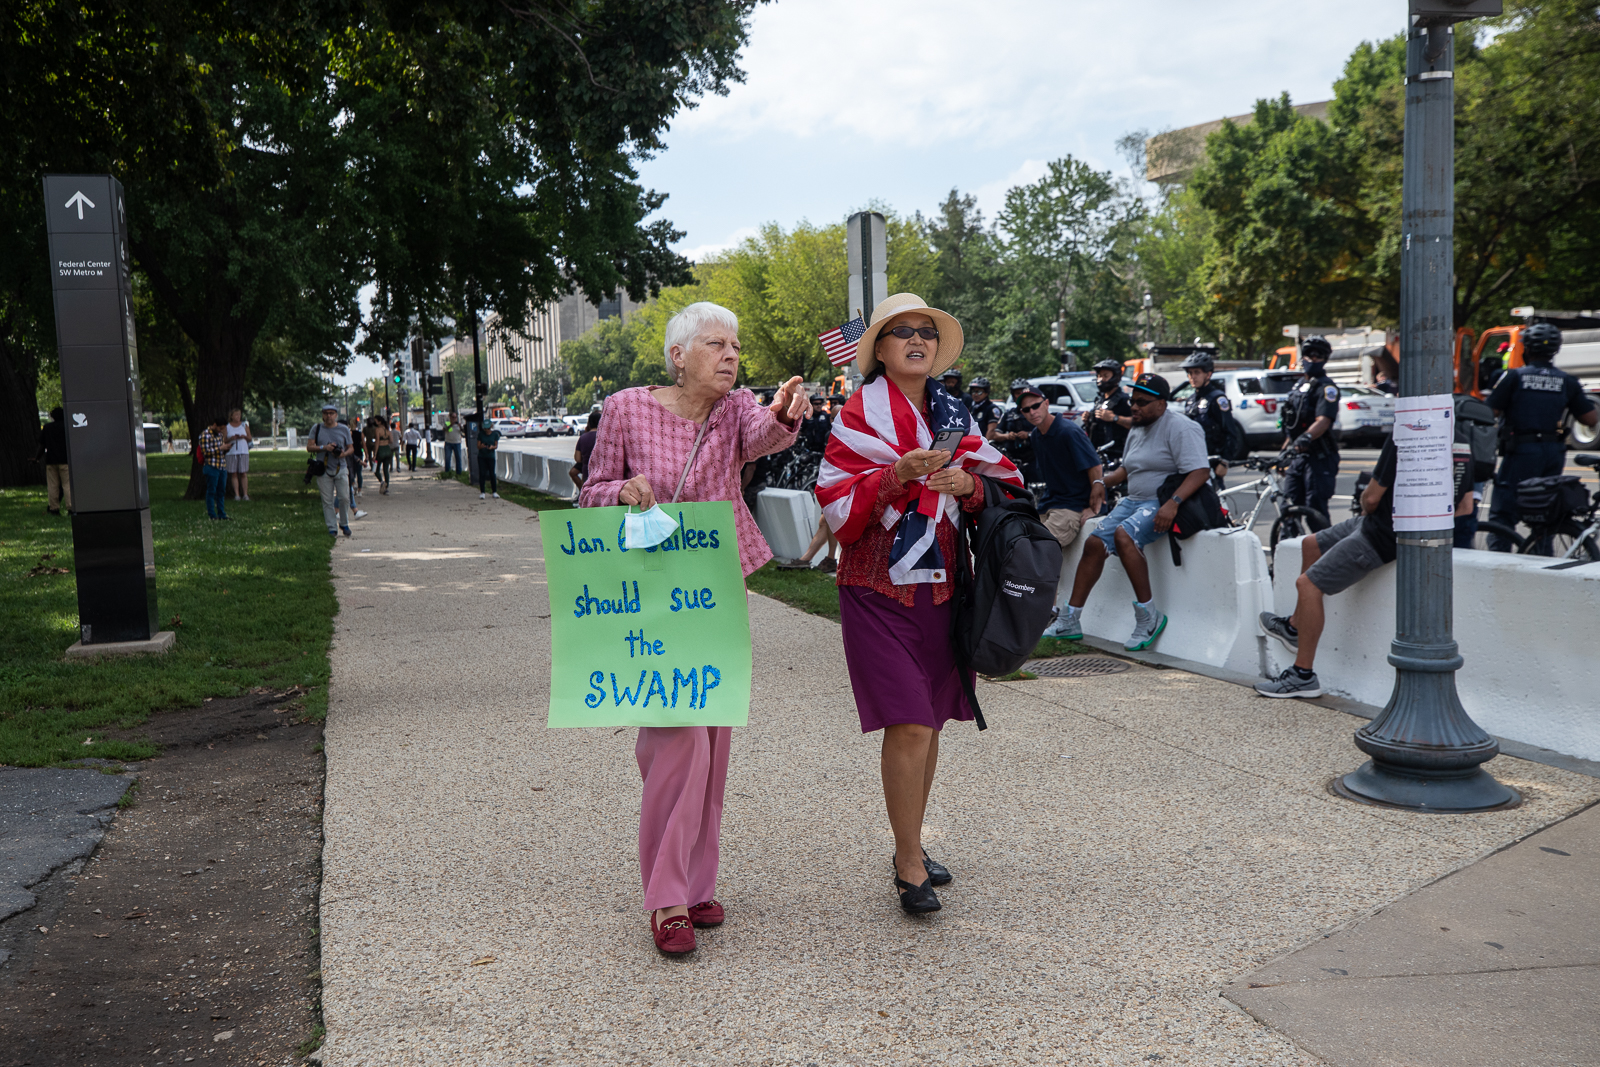 A woman attended the "Justice for J6" rally in Washington, D.C. holding a "Jan. 6 jailees should sue the swamp" on September 18, 2021. She told the DCNF that she considered writing "the pants off of Nancy Pelosi" in place of "swamp." ​(Kaylee Greenlee - Daily Caller News Foundation)